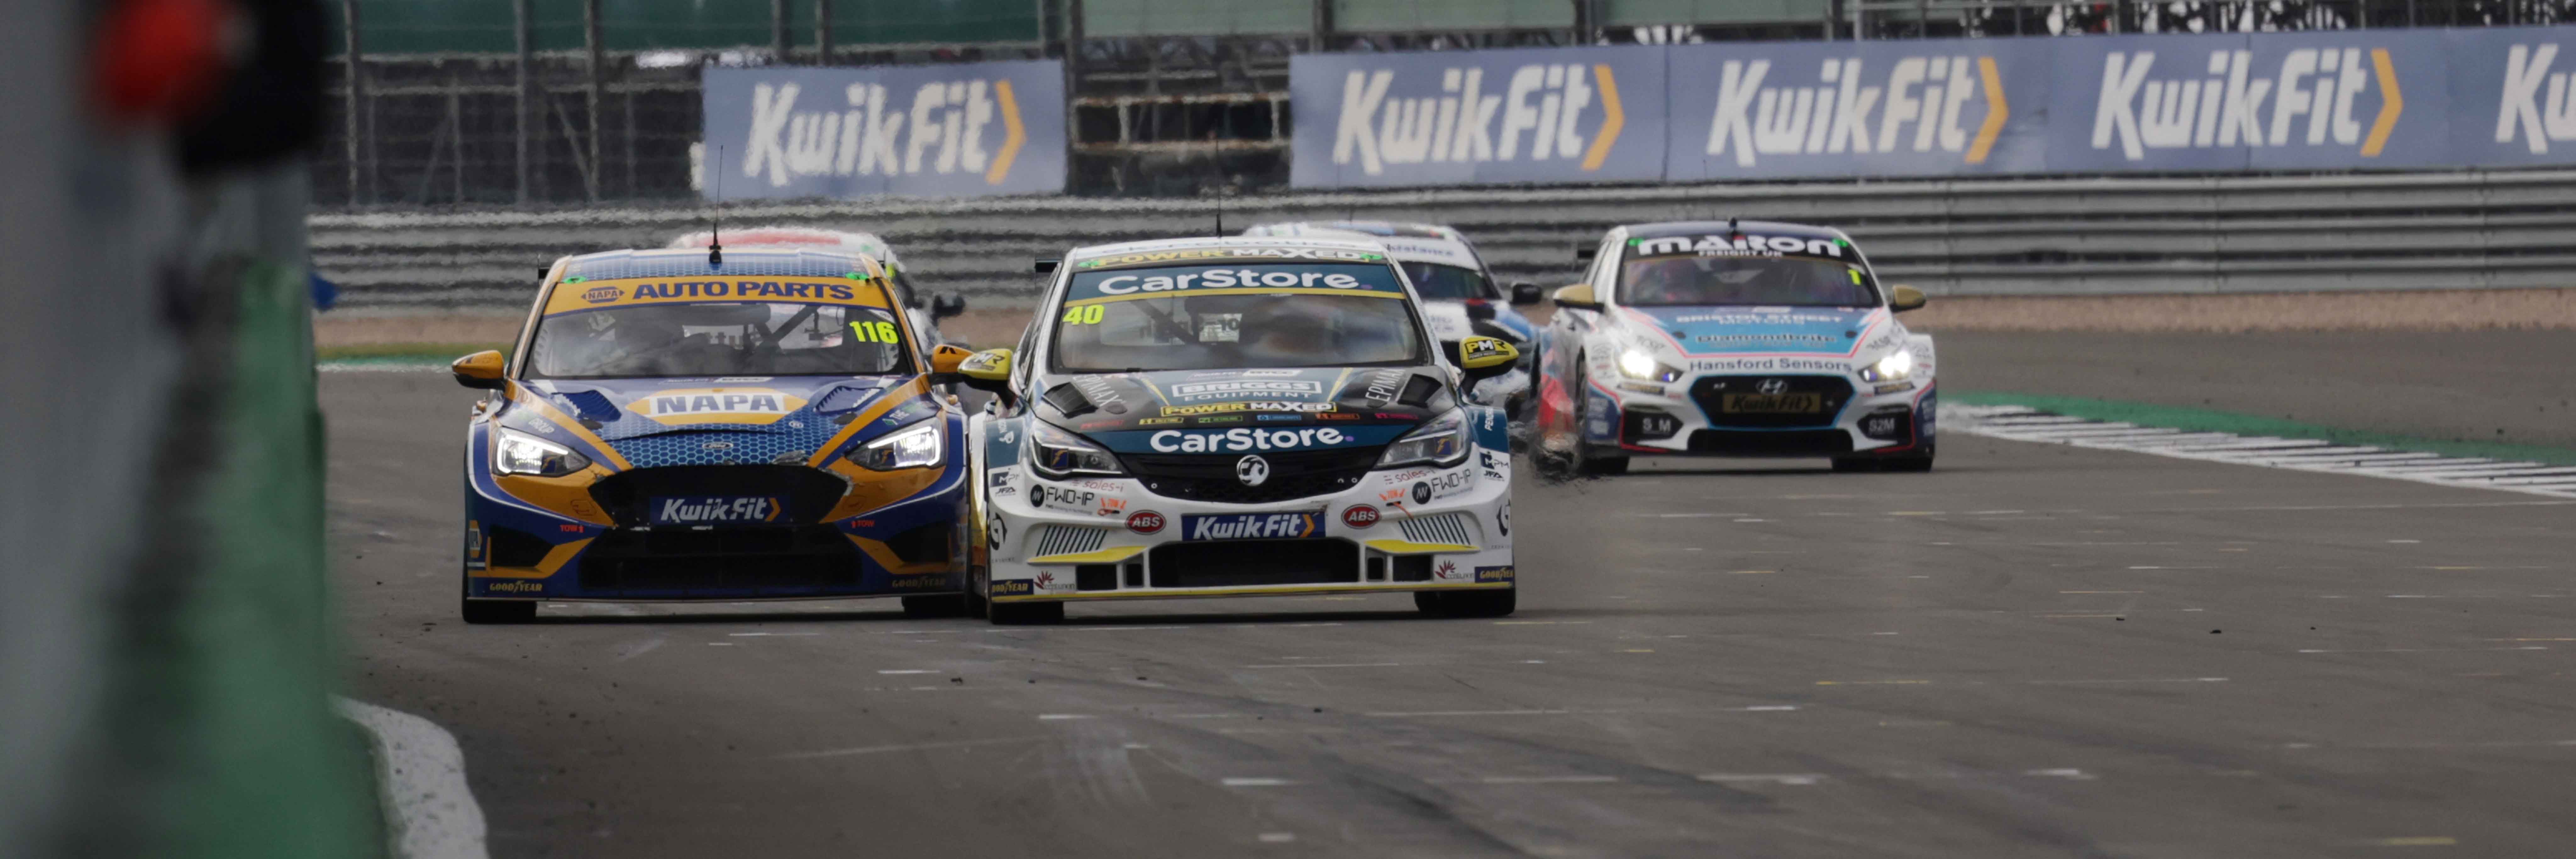 Ash Sutton passing Aron Taylor-Smith for the Race 2 BTCC win at Silverstone